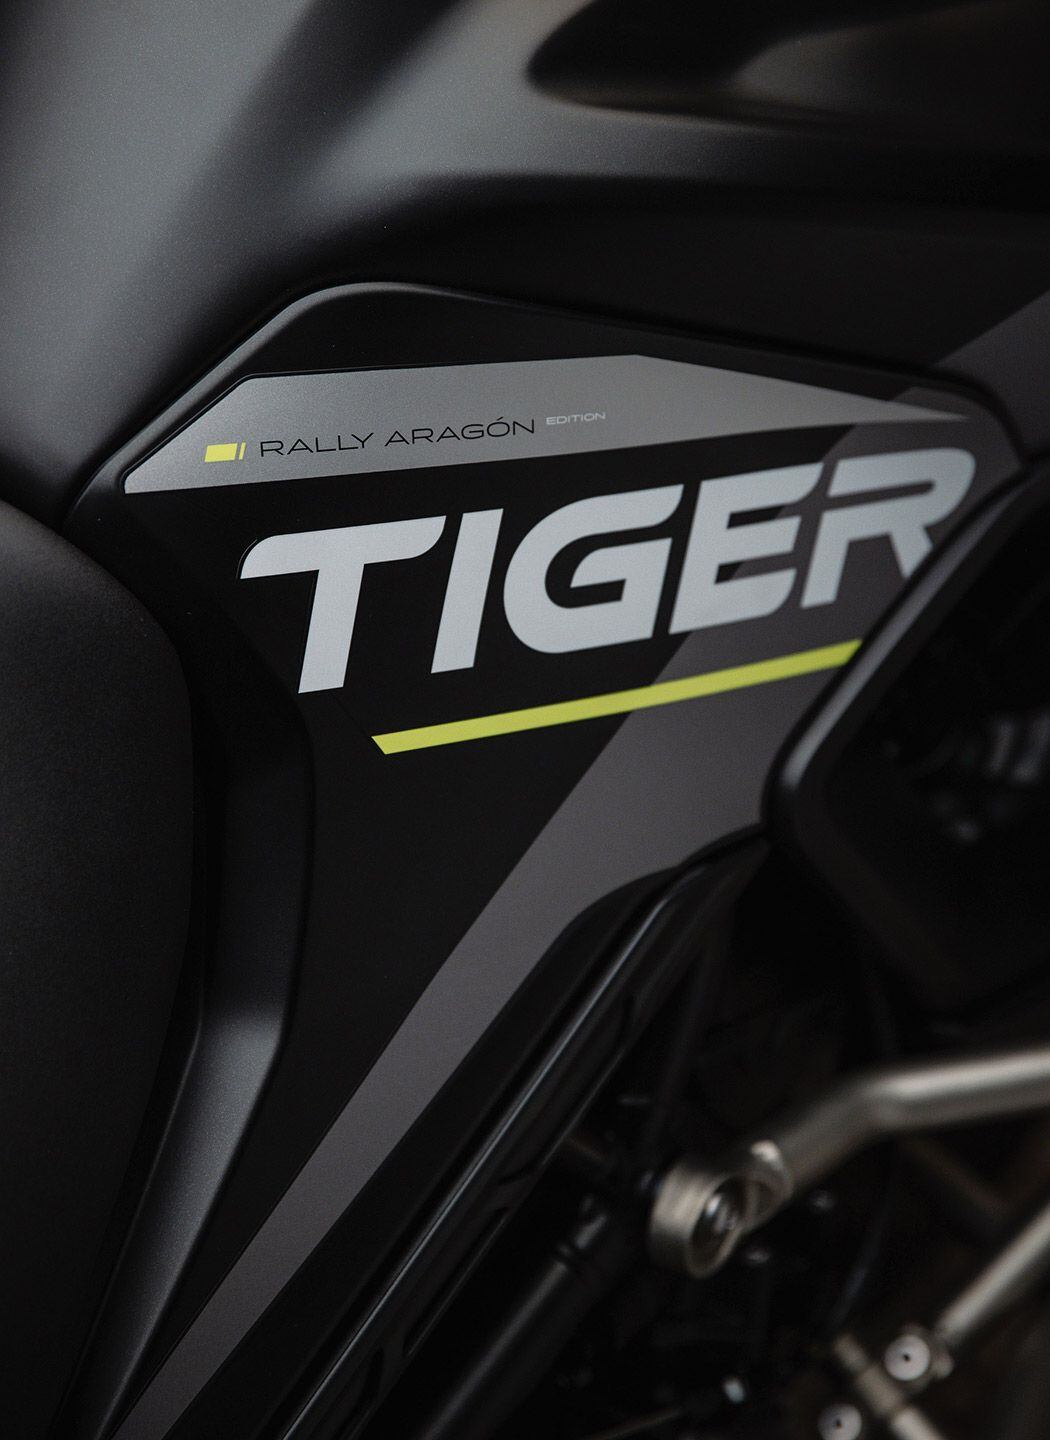 Special-edition detailing on the Tiger 900 Rally Aragón Edition.